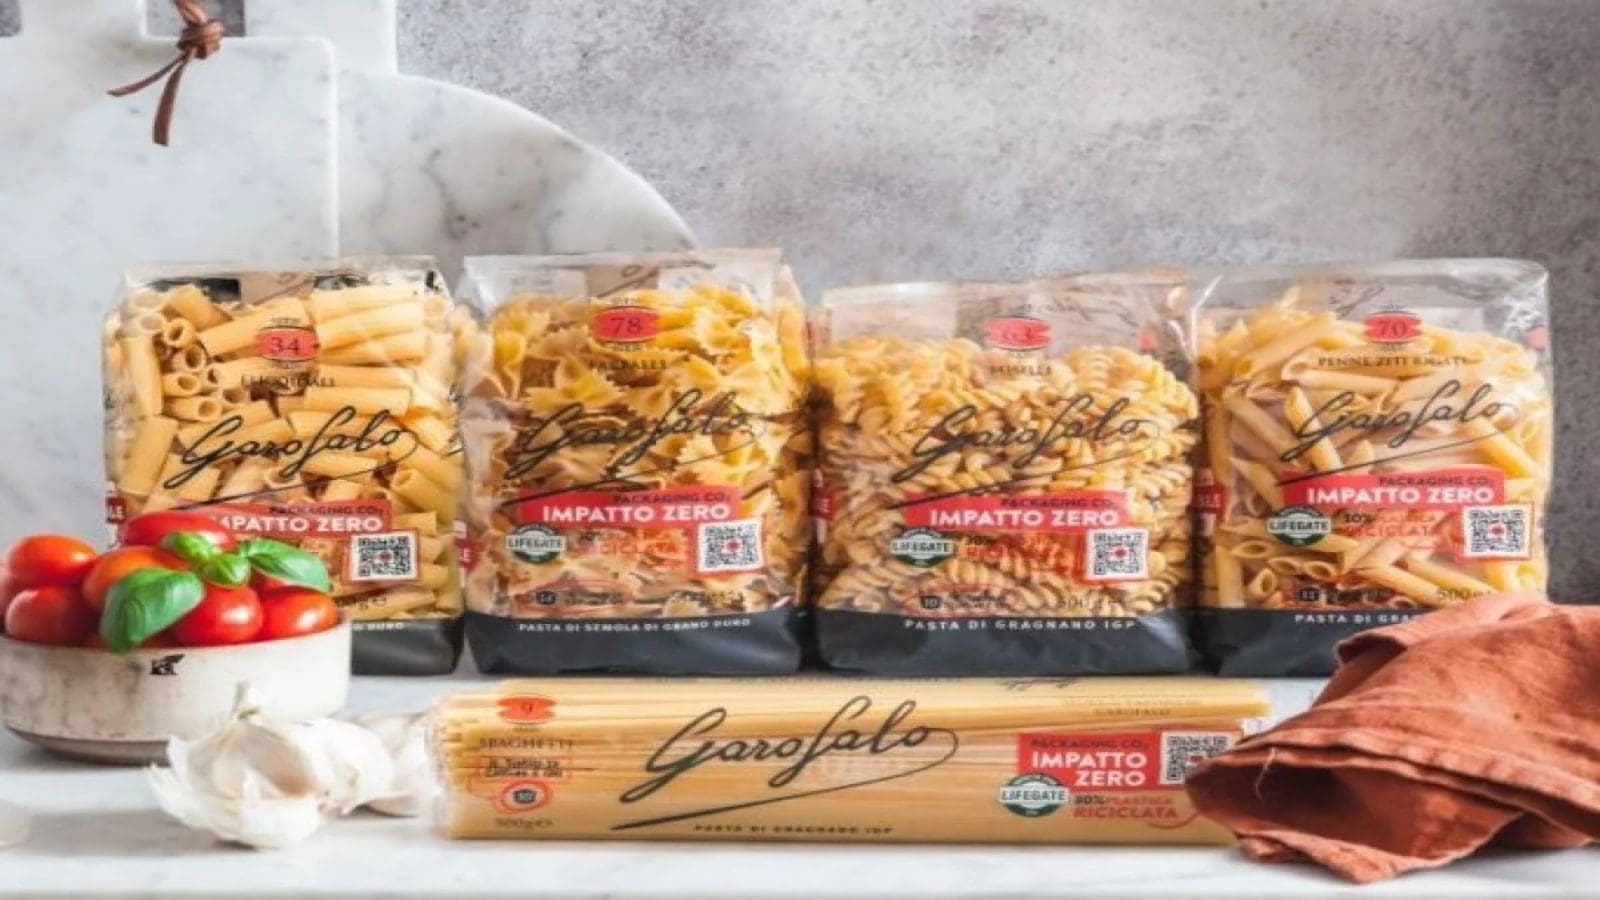 New image for Garofalo’s pasta as the company adopts SABIC’s certified circular polypropylene for packaging